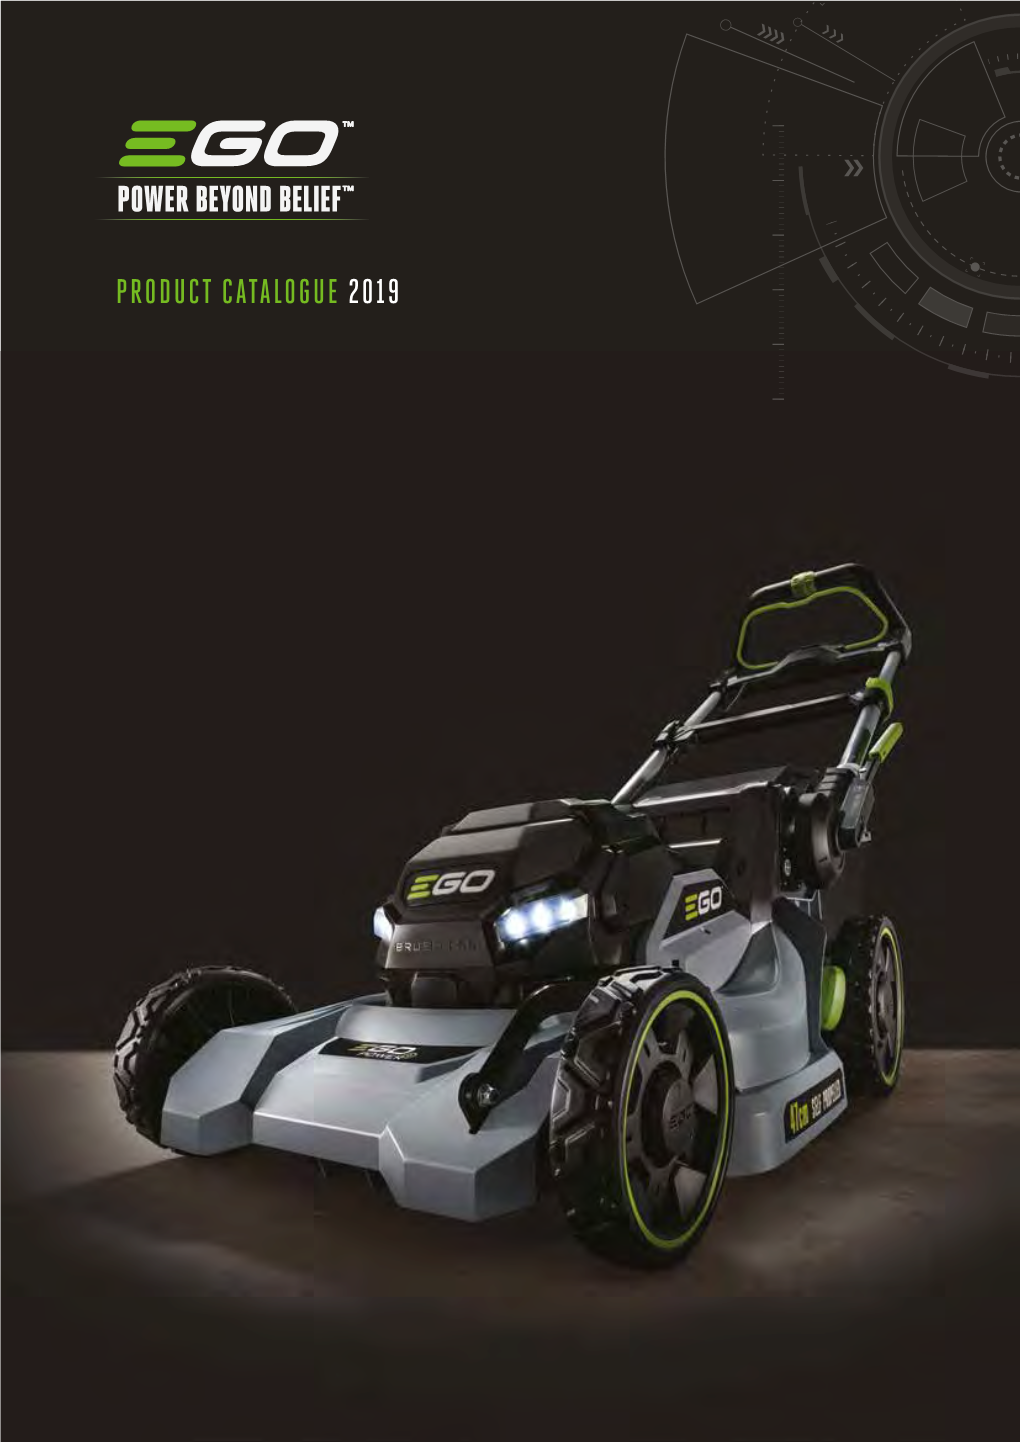 Product Catalogue 2019 Contents